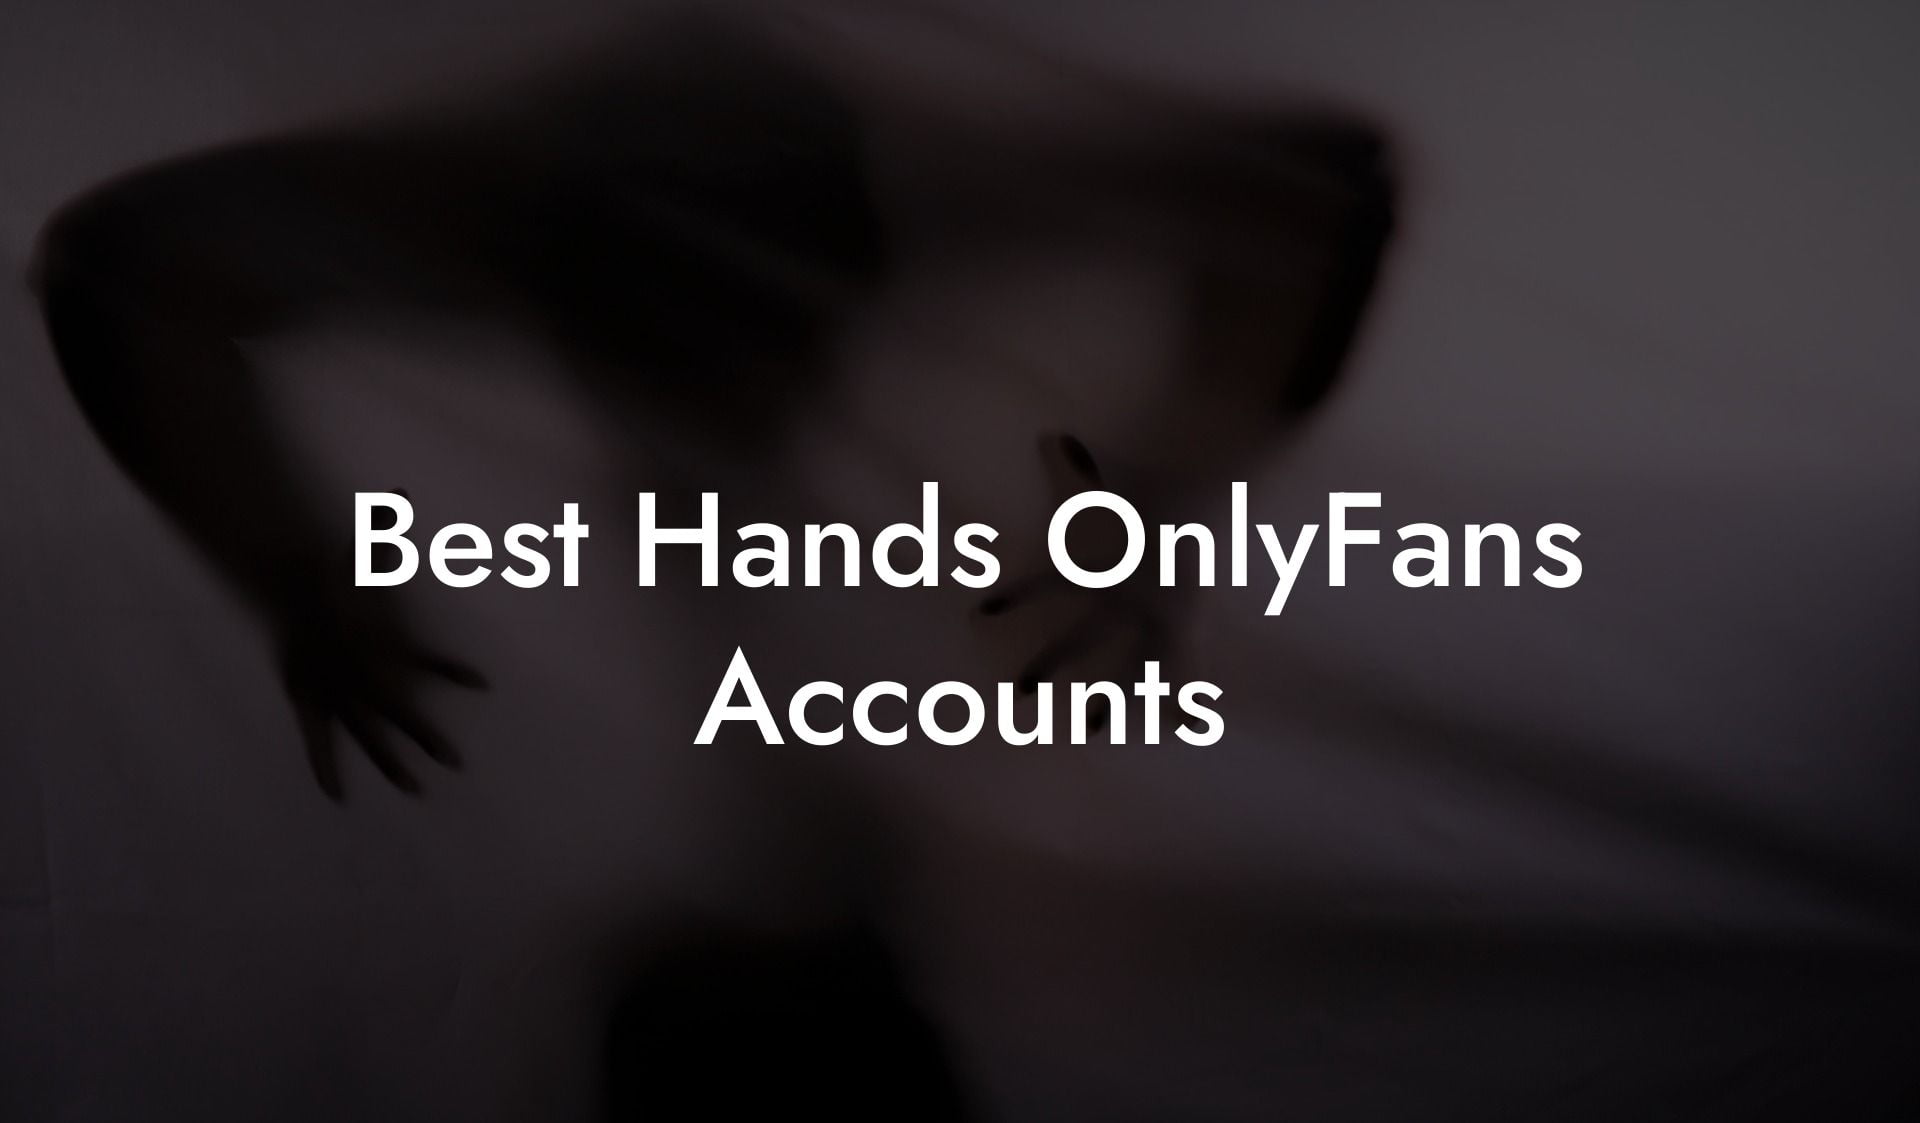 Best Hands OnlyFans Accounts